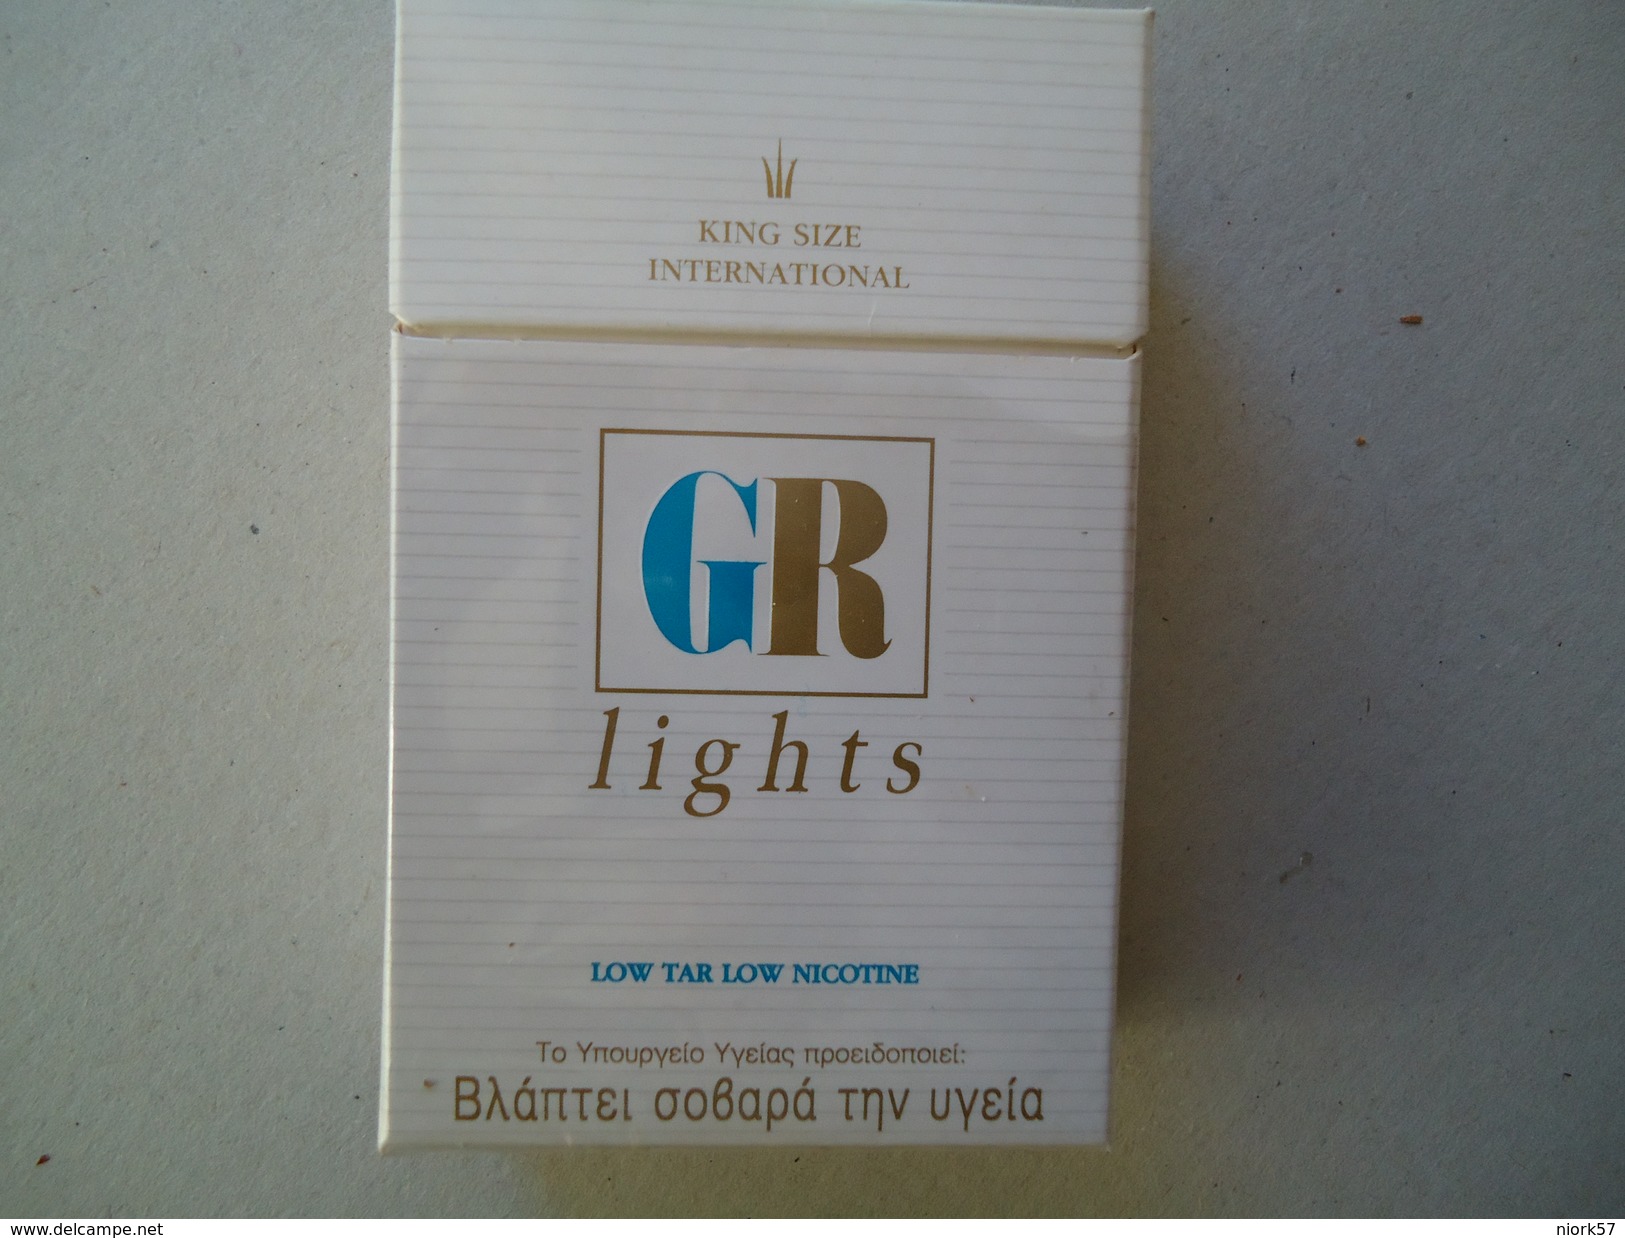 GREECE EMPTY TOBACCO BOXES IN DRACHMAS  GR LIGHTS - Empty Tobacco Boxes